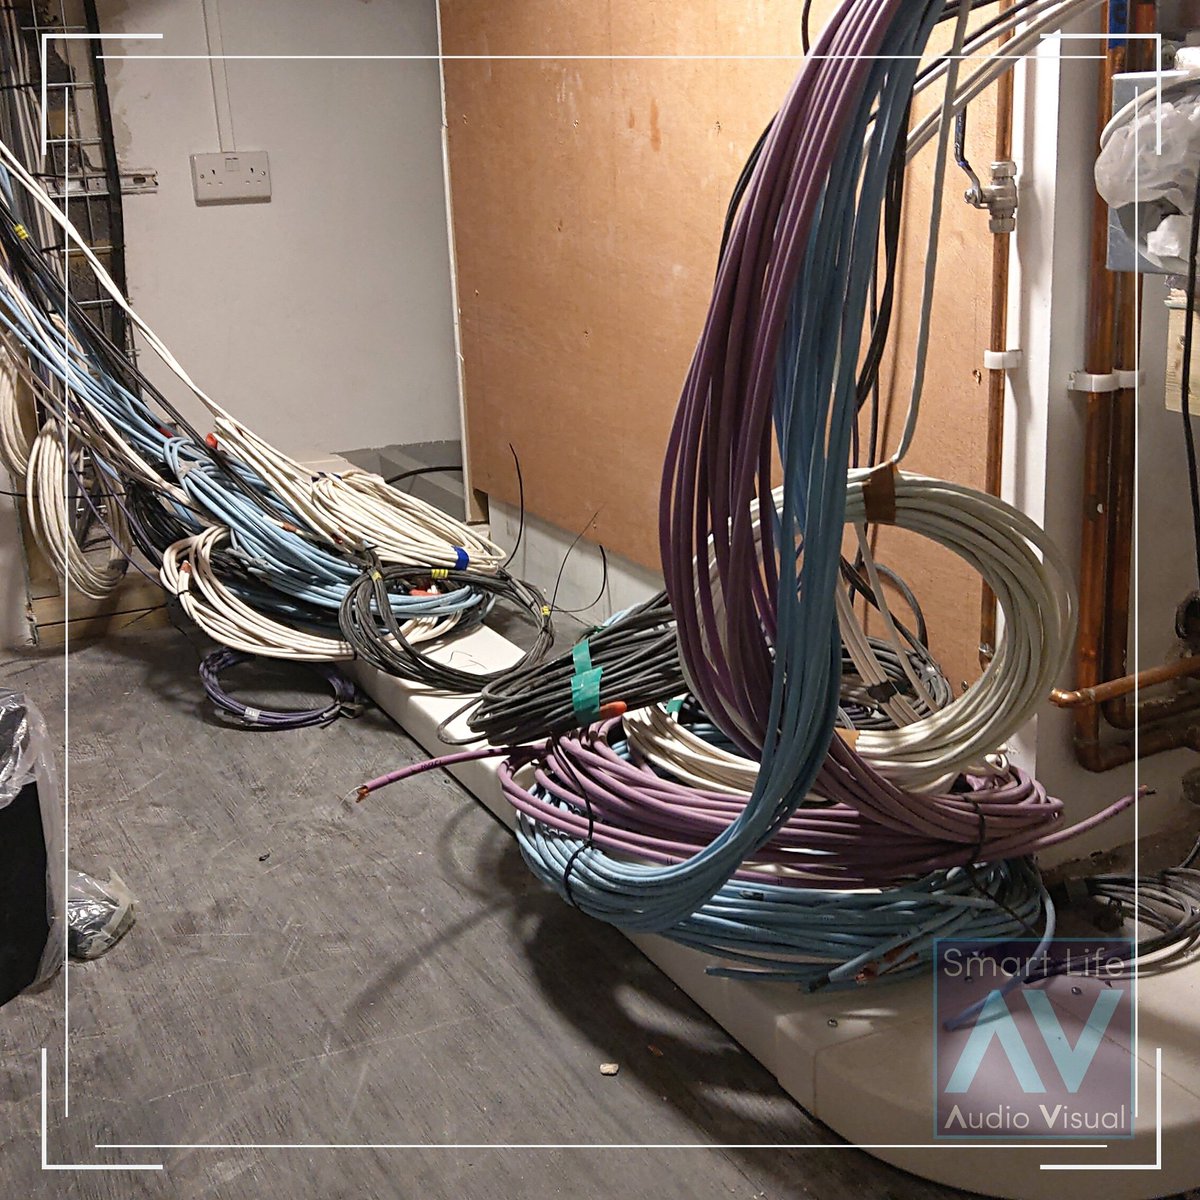 All smart homes start of as spaghetti junction. These photos show how we work our magic to neatly organise, manage and terminate these into a termination box #SmartHome #SmartHomeInstaller #AV #AVInstaller #HomeRenovation #Rackbuild #HomeTechnology #CEDIA #CEDIAAdvancedMember